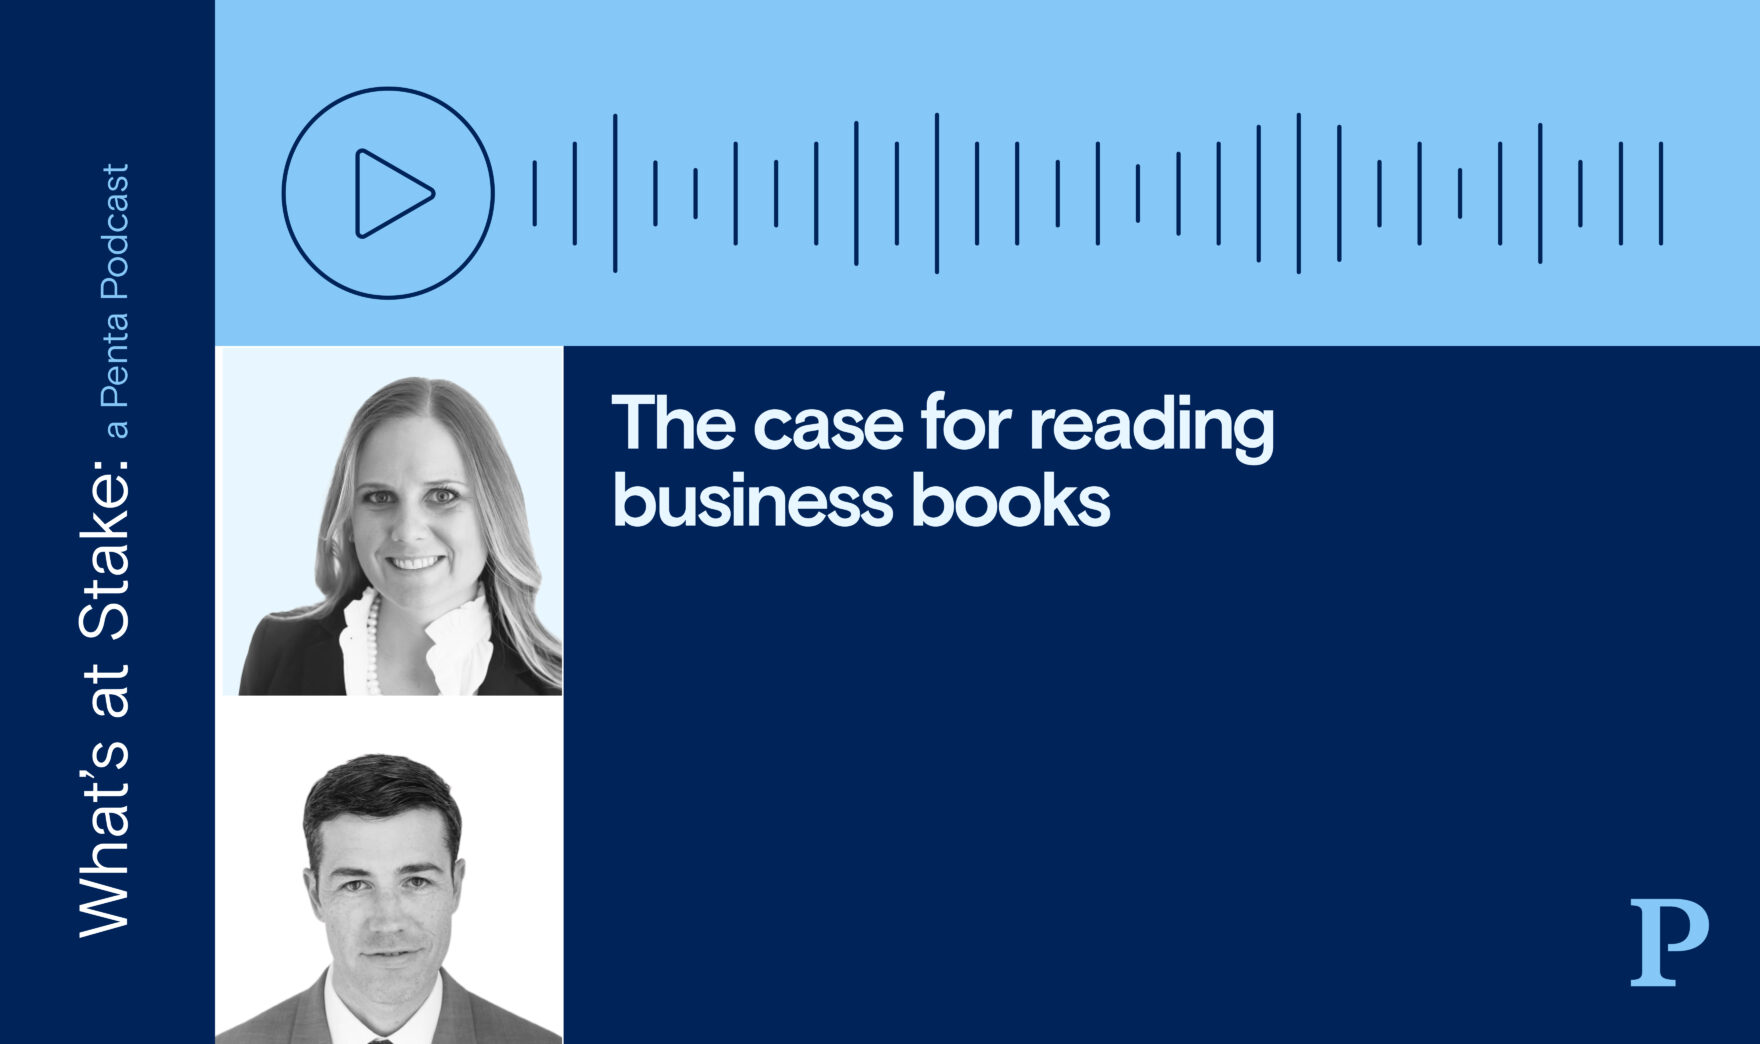 The case for reading business books